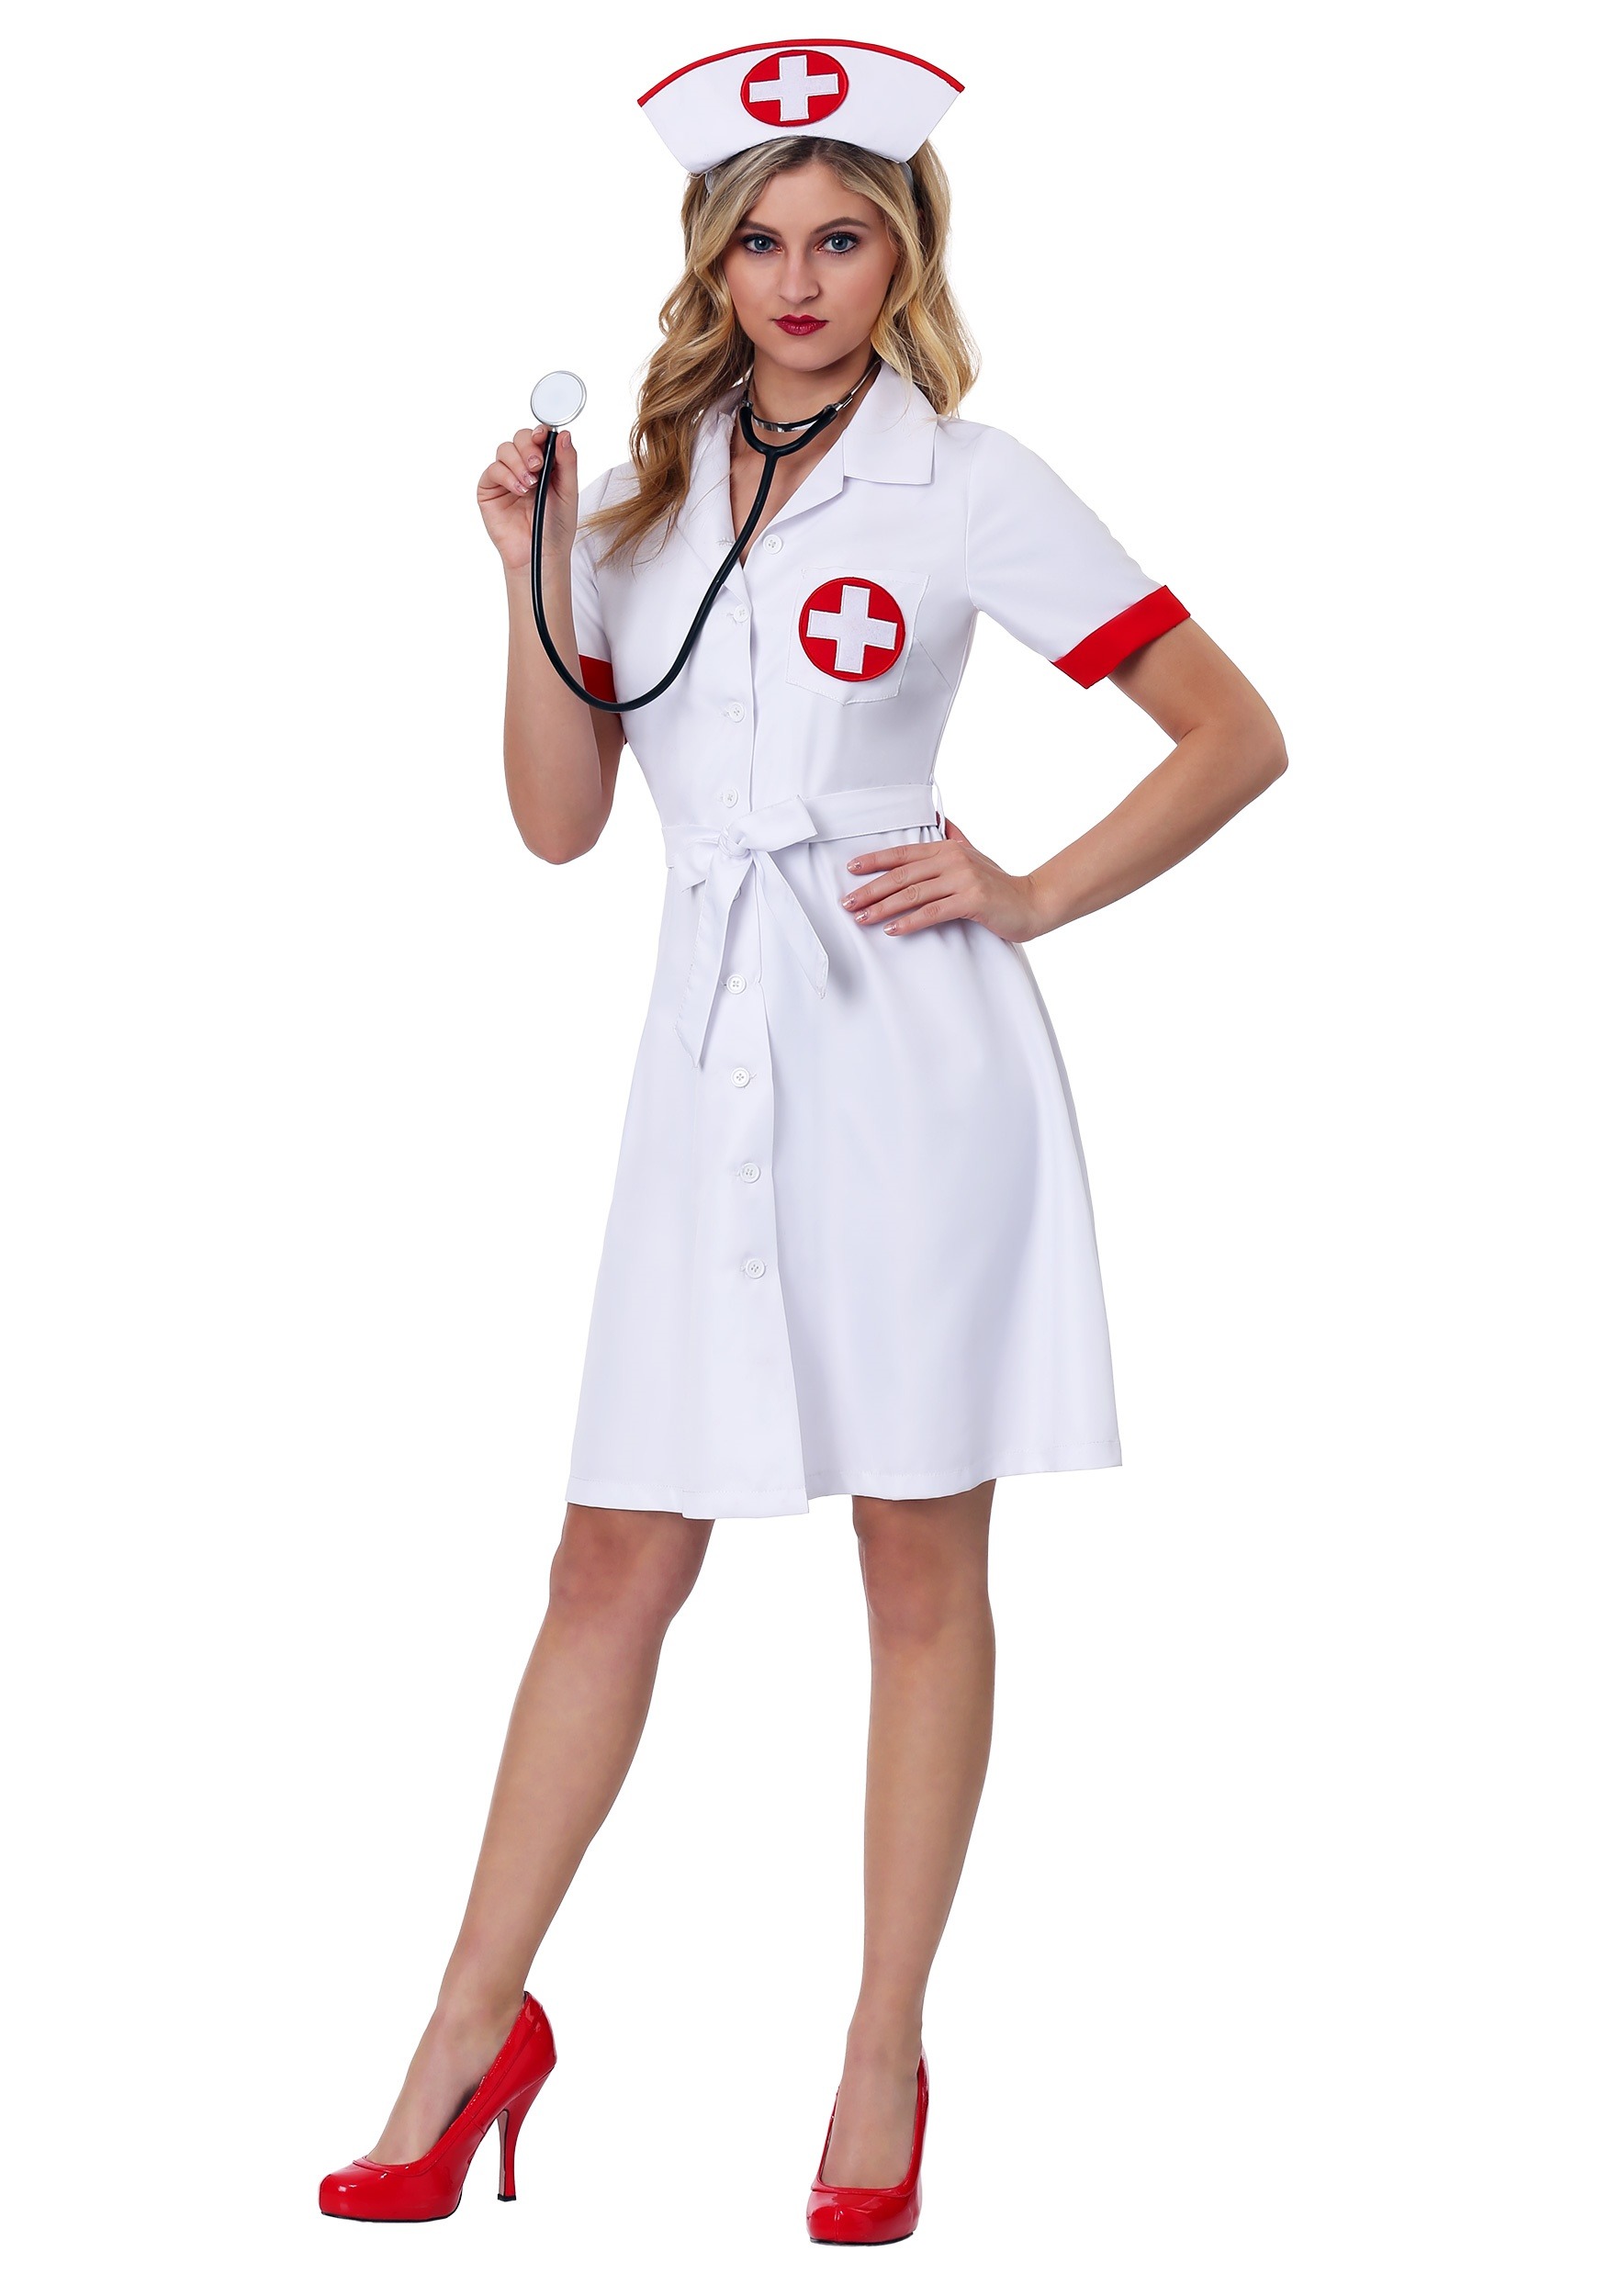 Photos - Fancy Dress UP3D FUN Costumes Plus Size Stitch Me Up Nurse Costume for Women Red/White 